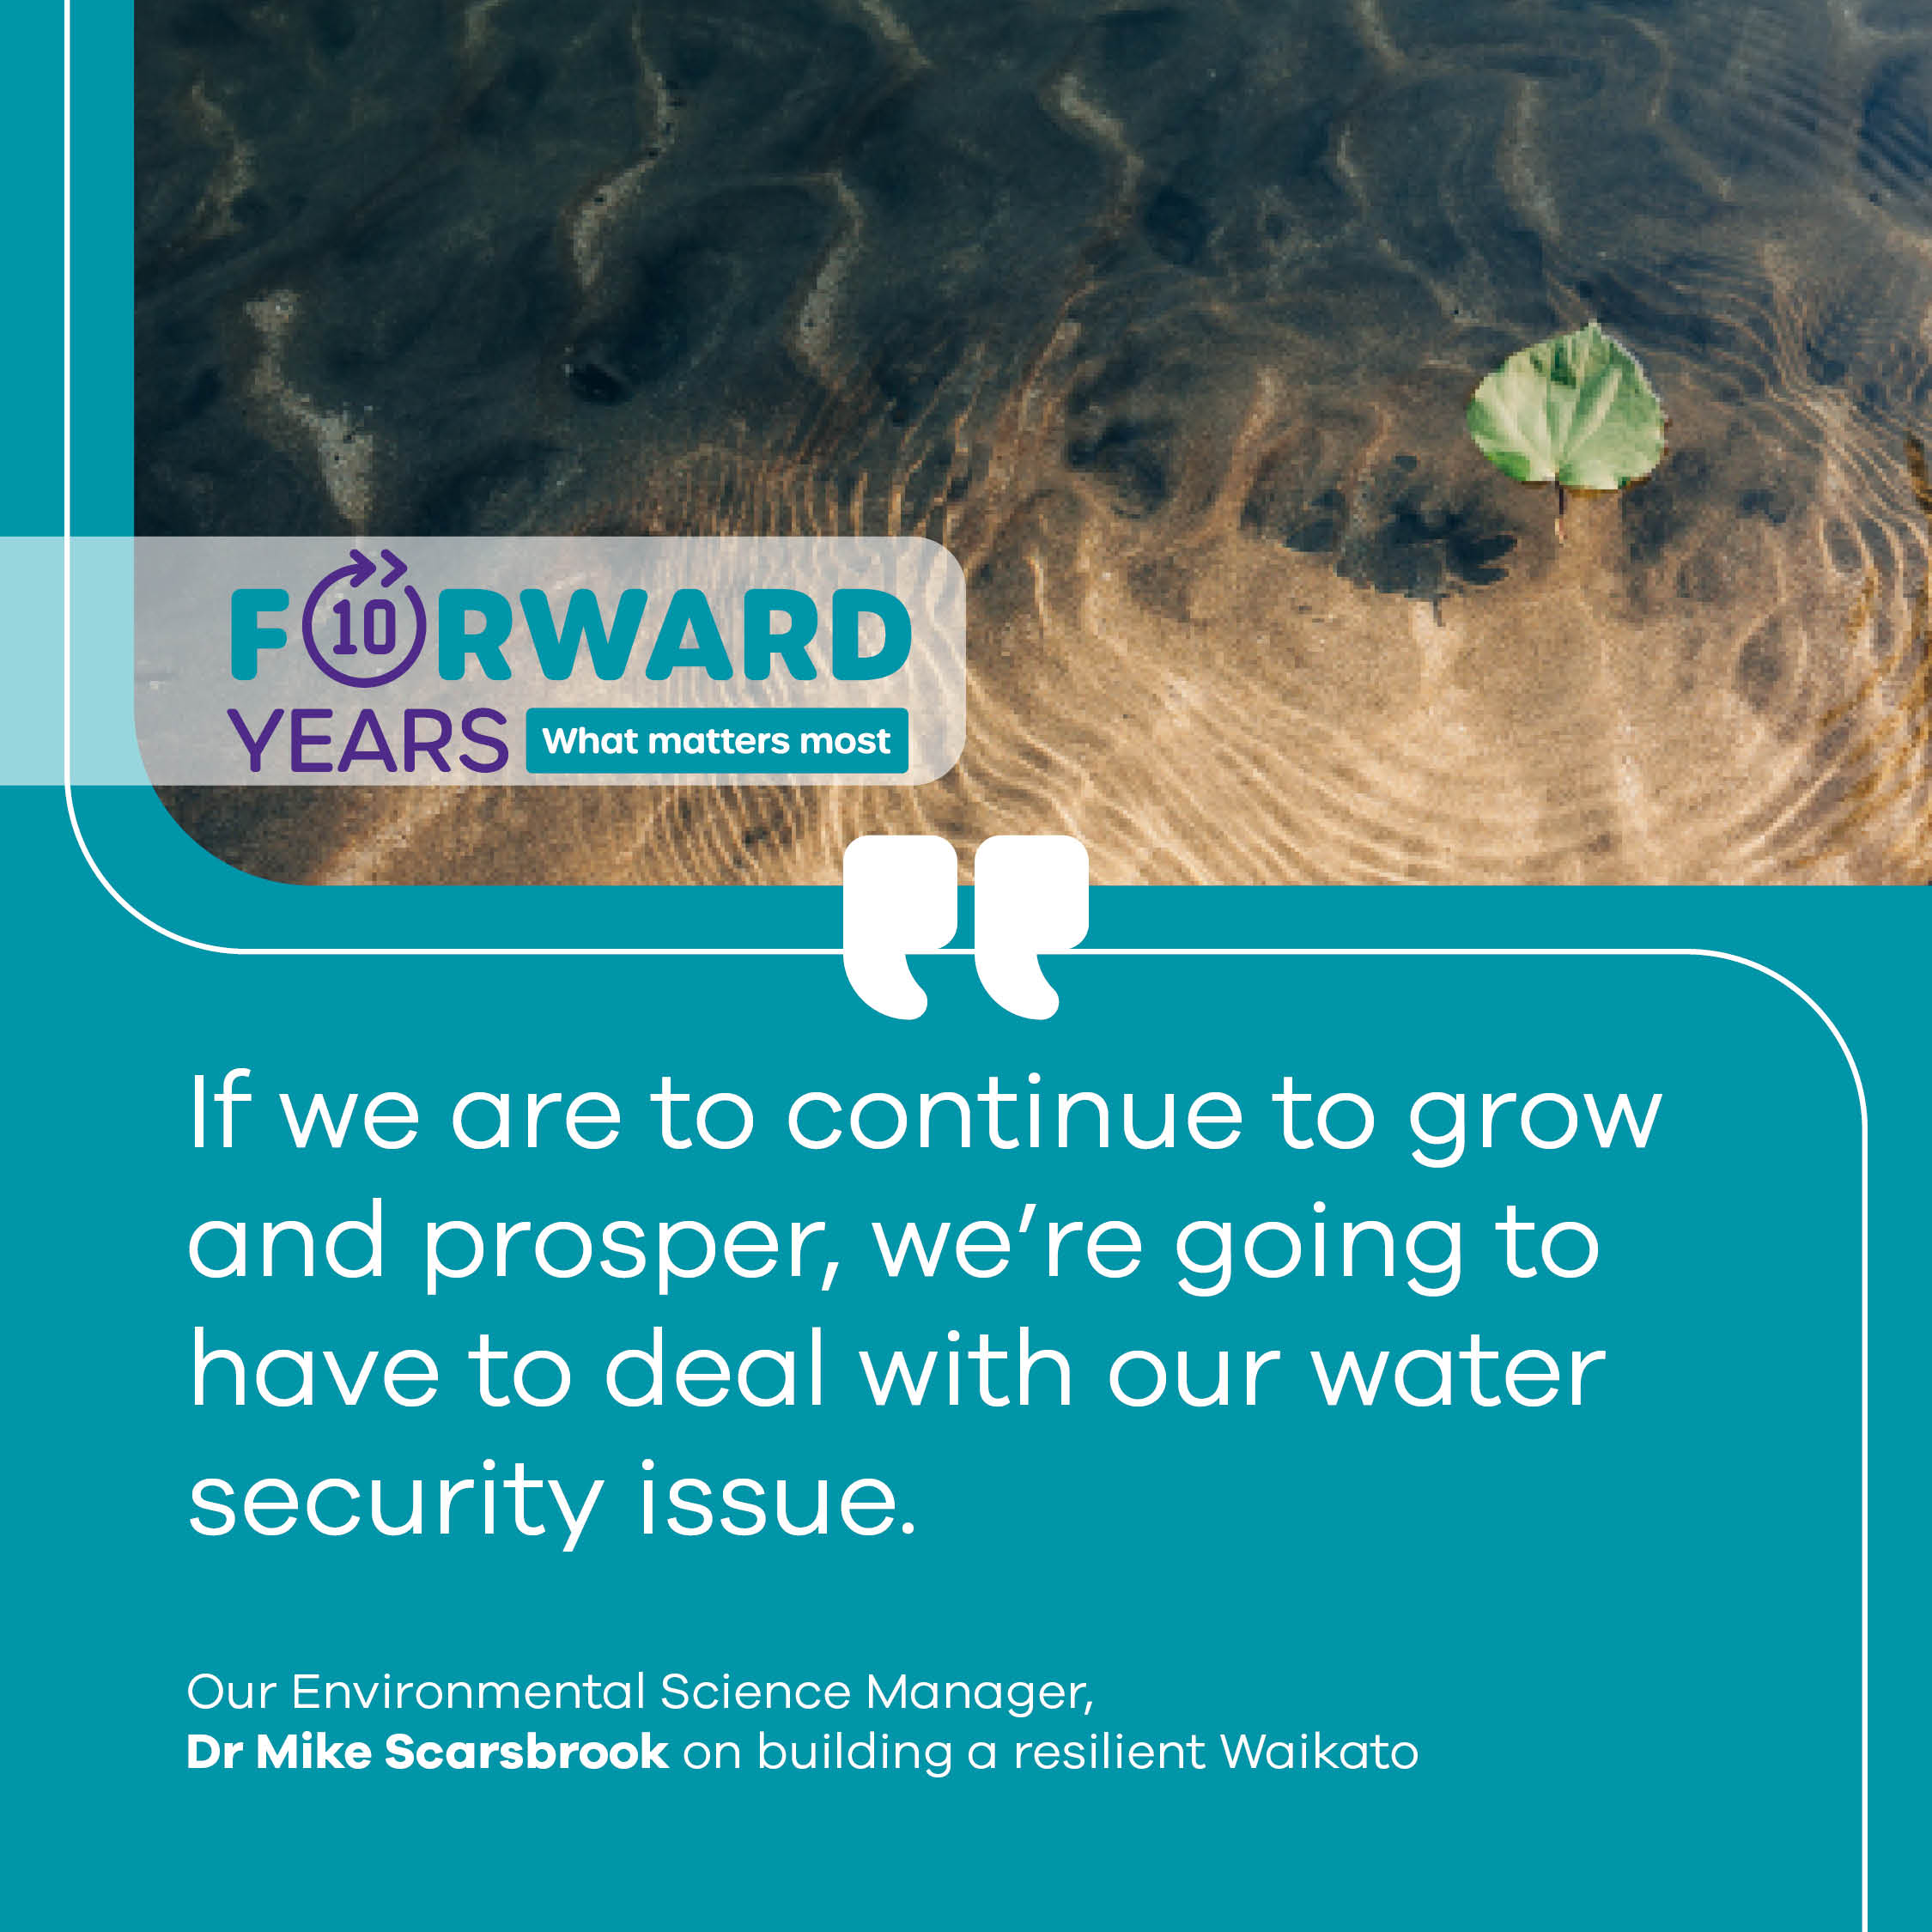 Image - LTP quote - Water security